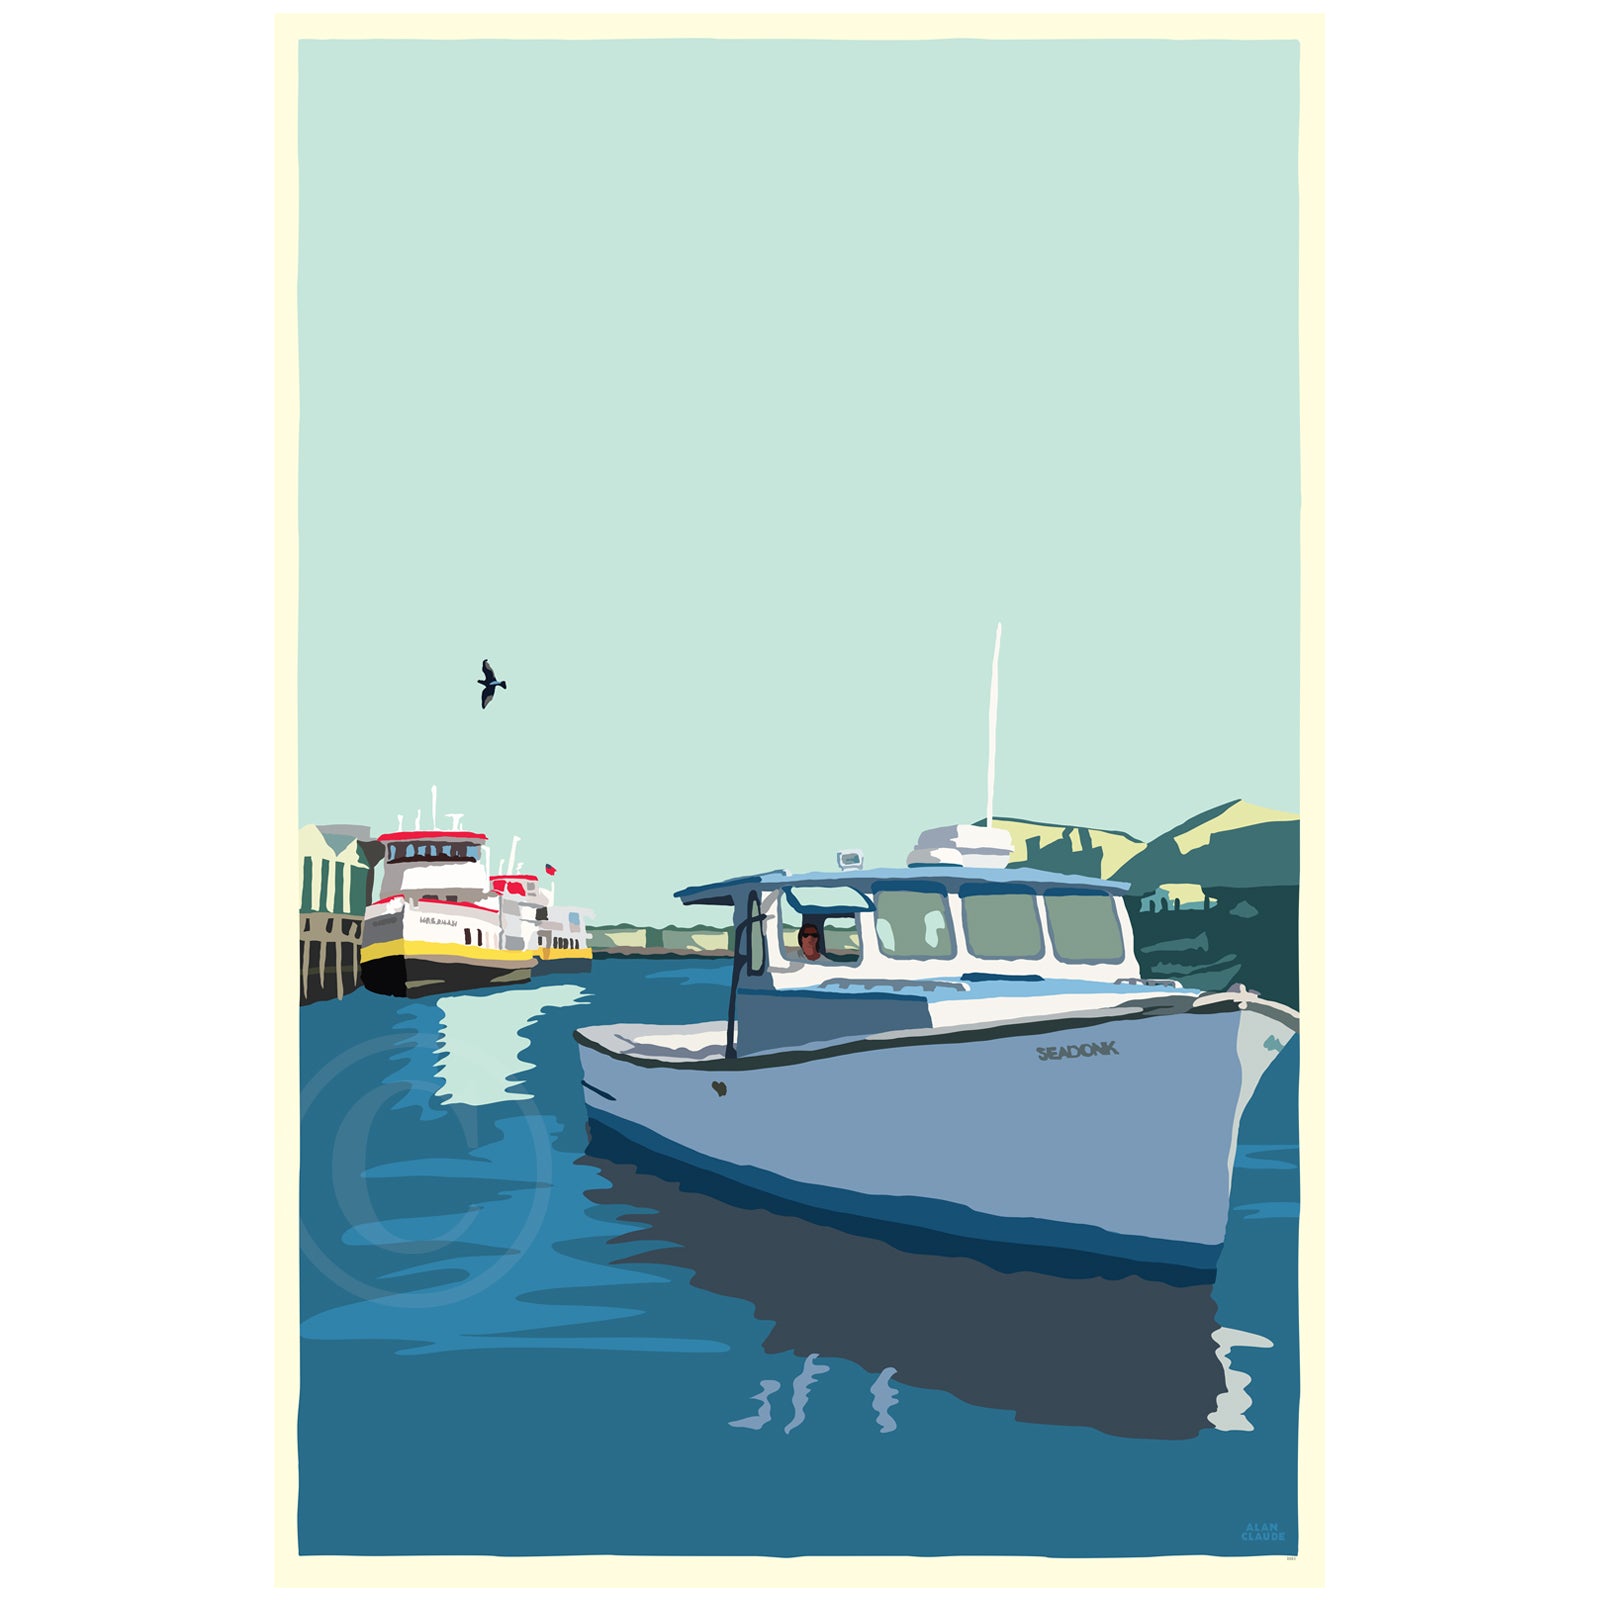 Coming Home Art Print 24" x 36" Framed Wall Poster - Maine